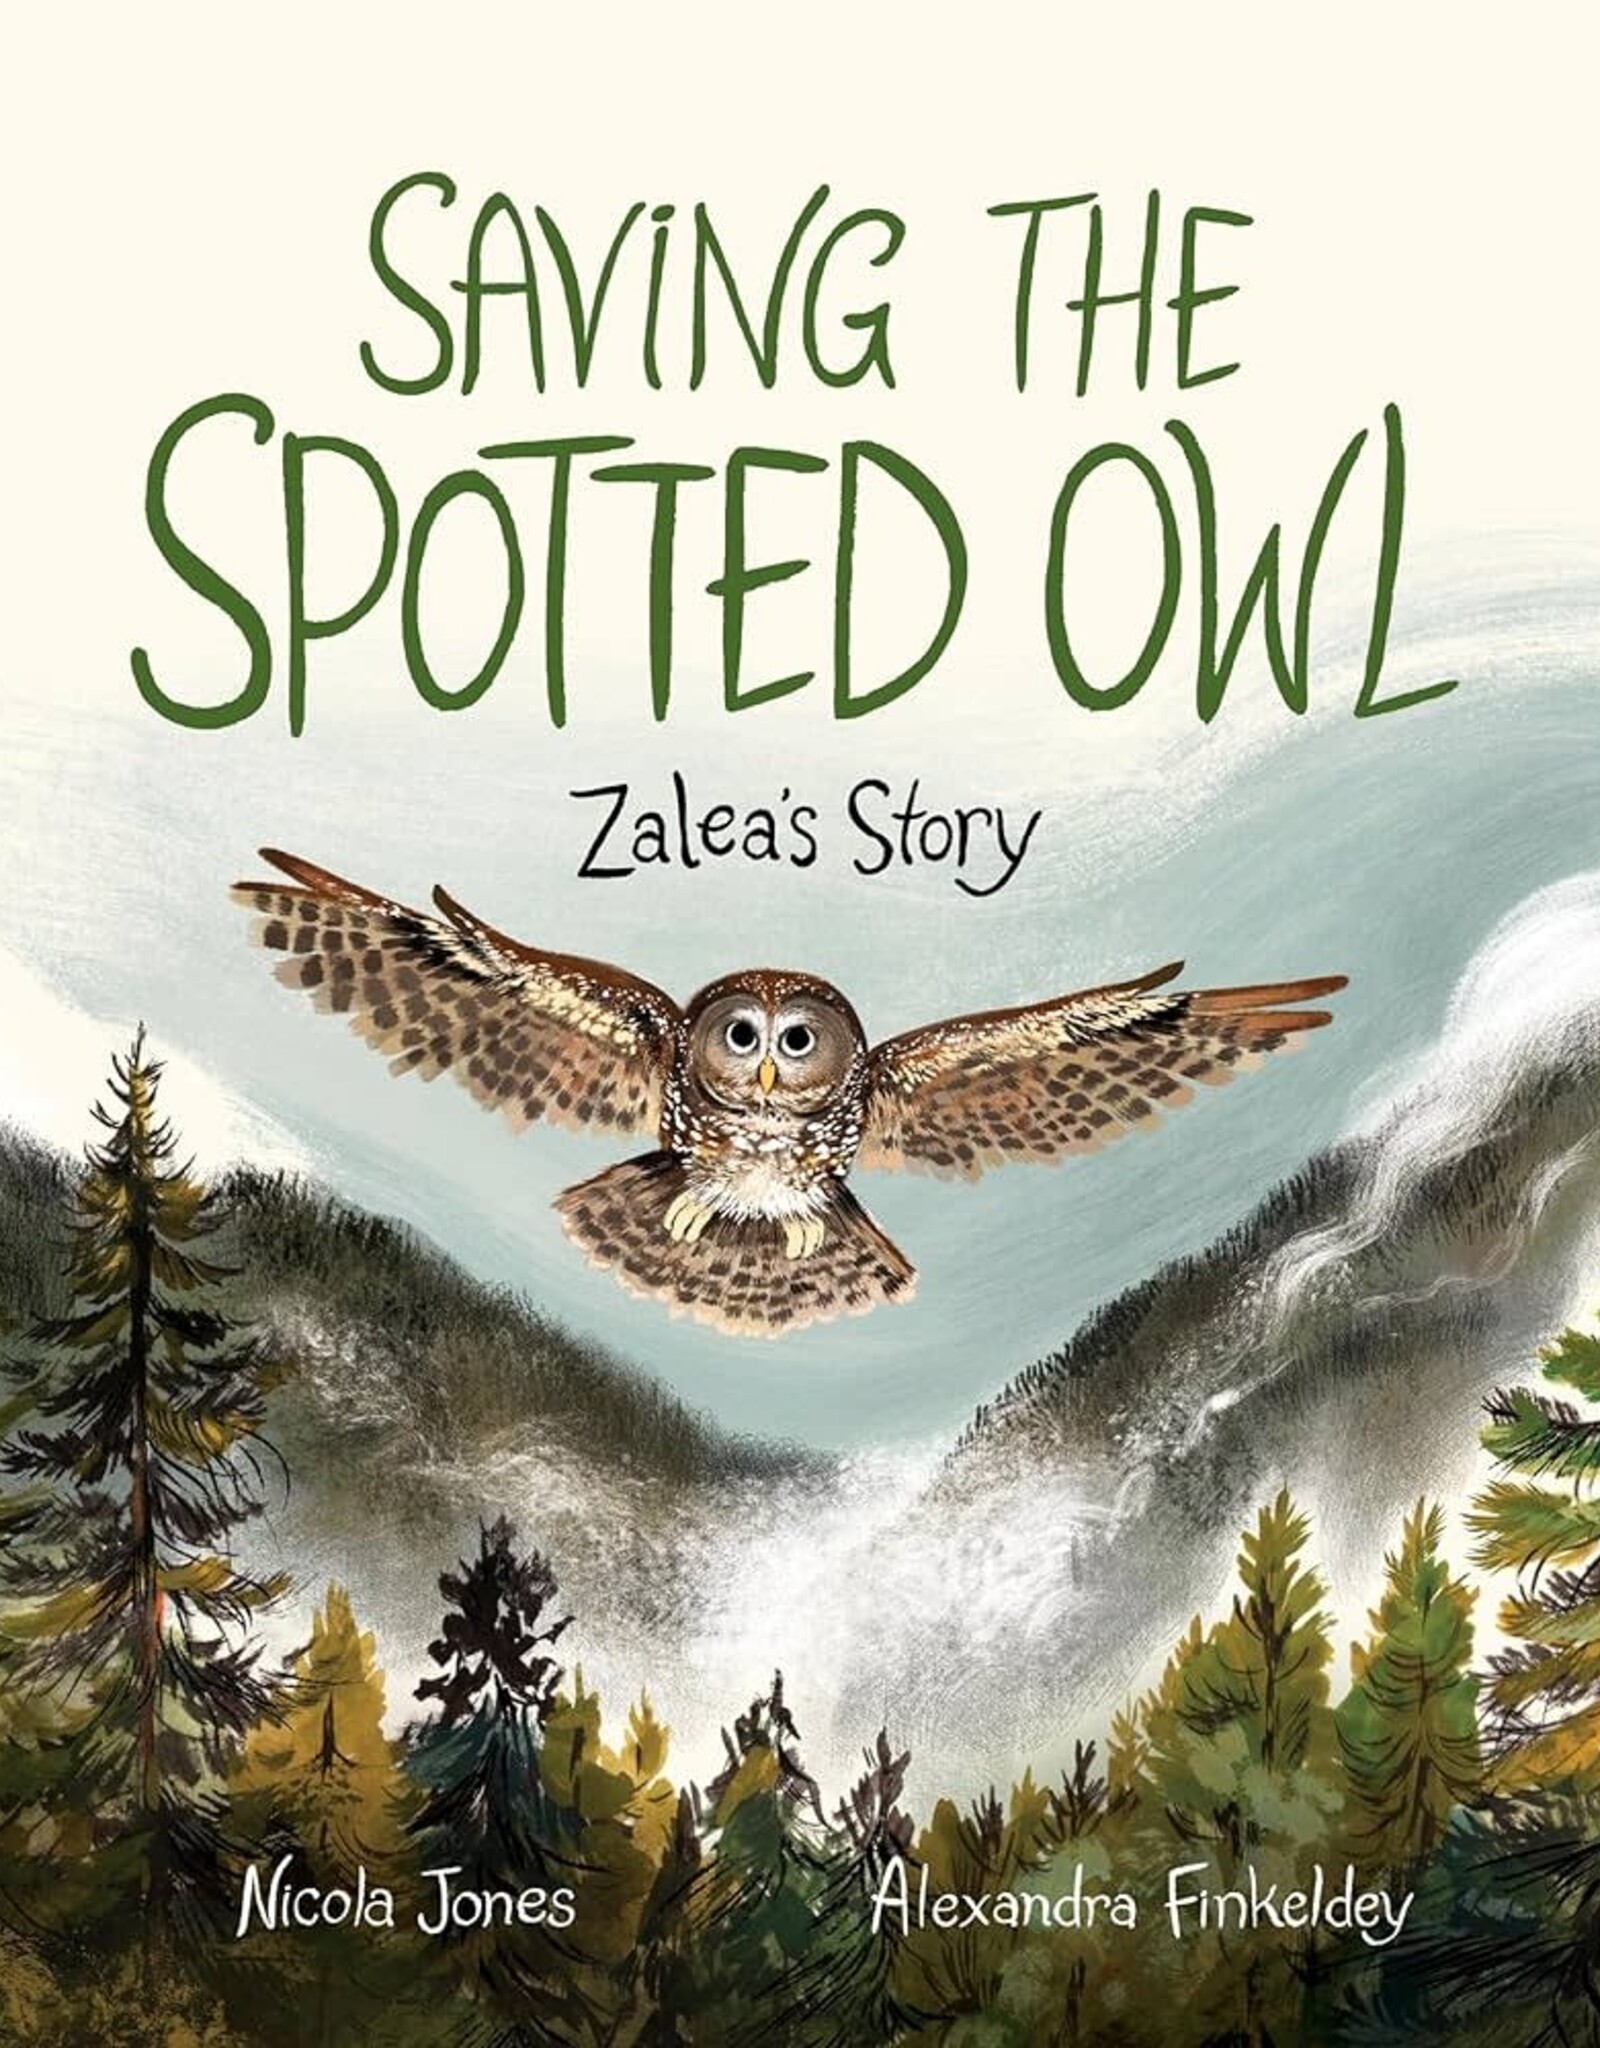 BOOK PUBLISHERS SAVING THE SPOTTED OWL